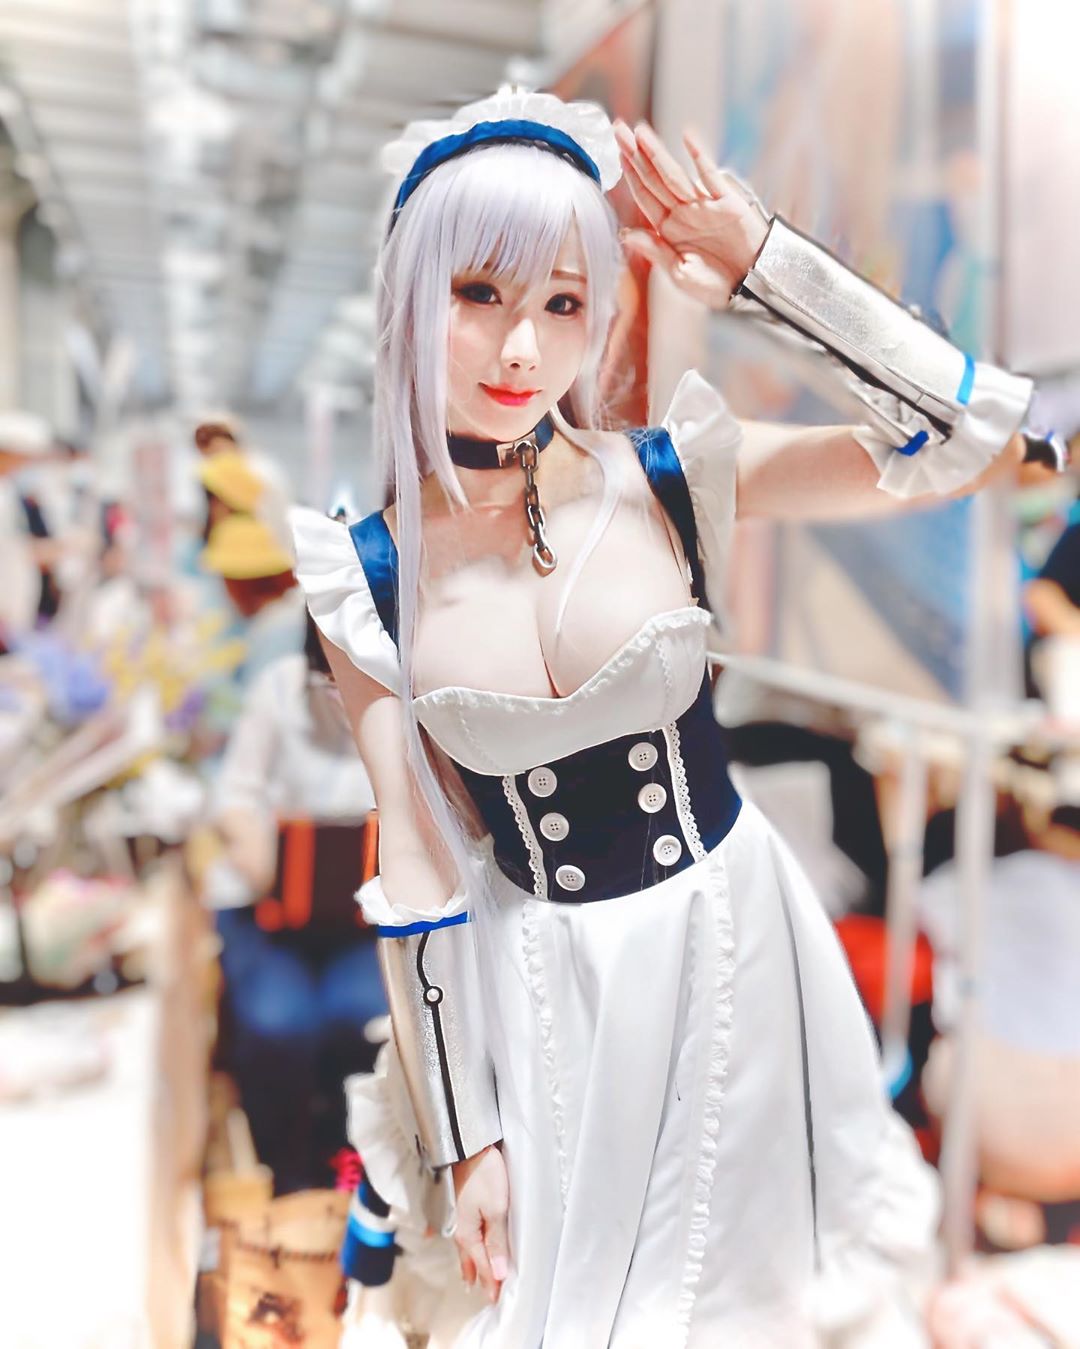 Belfast Cosplay From Azur Lane By HaneAme